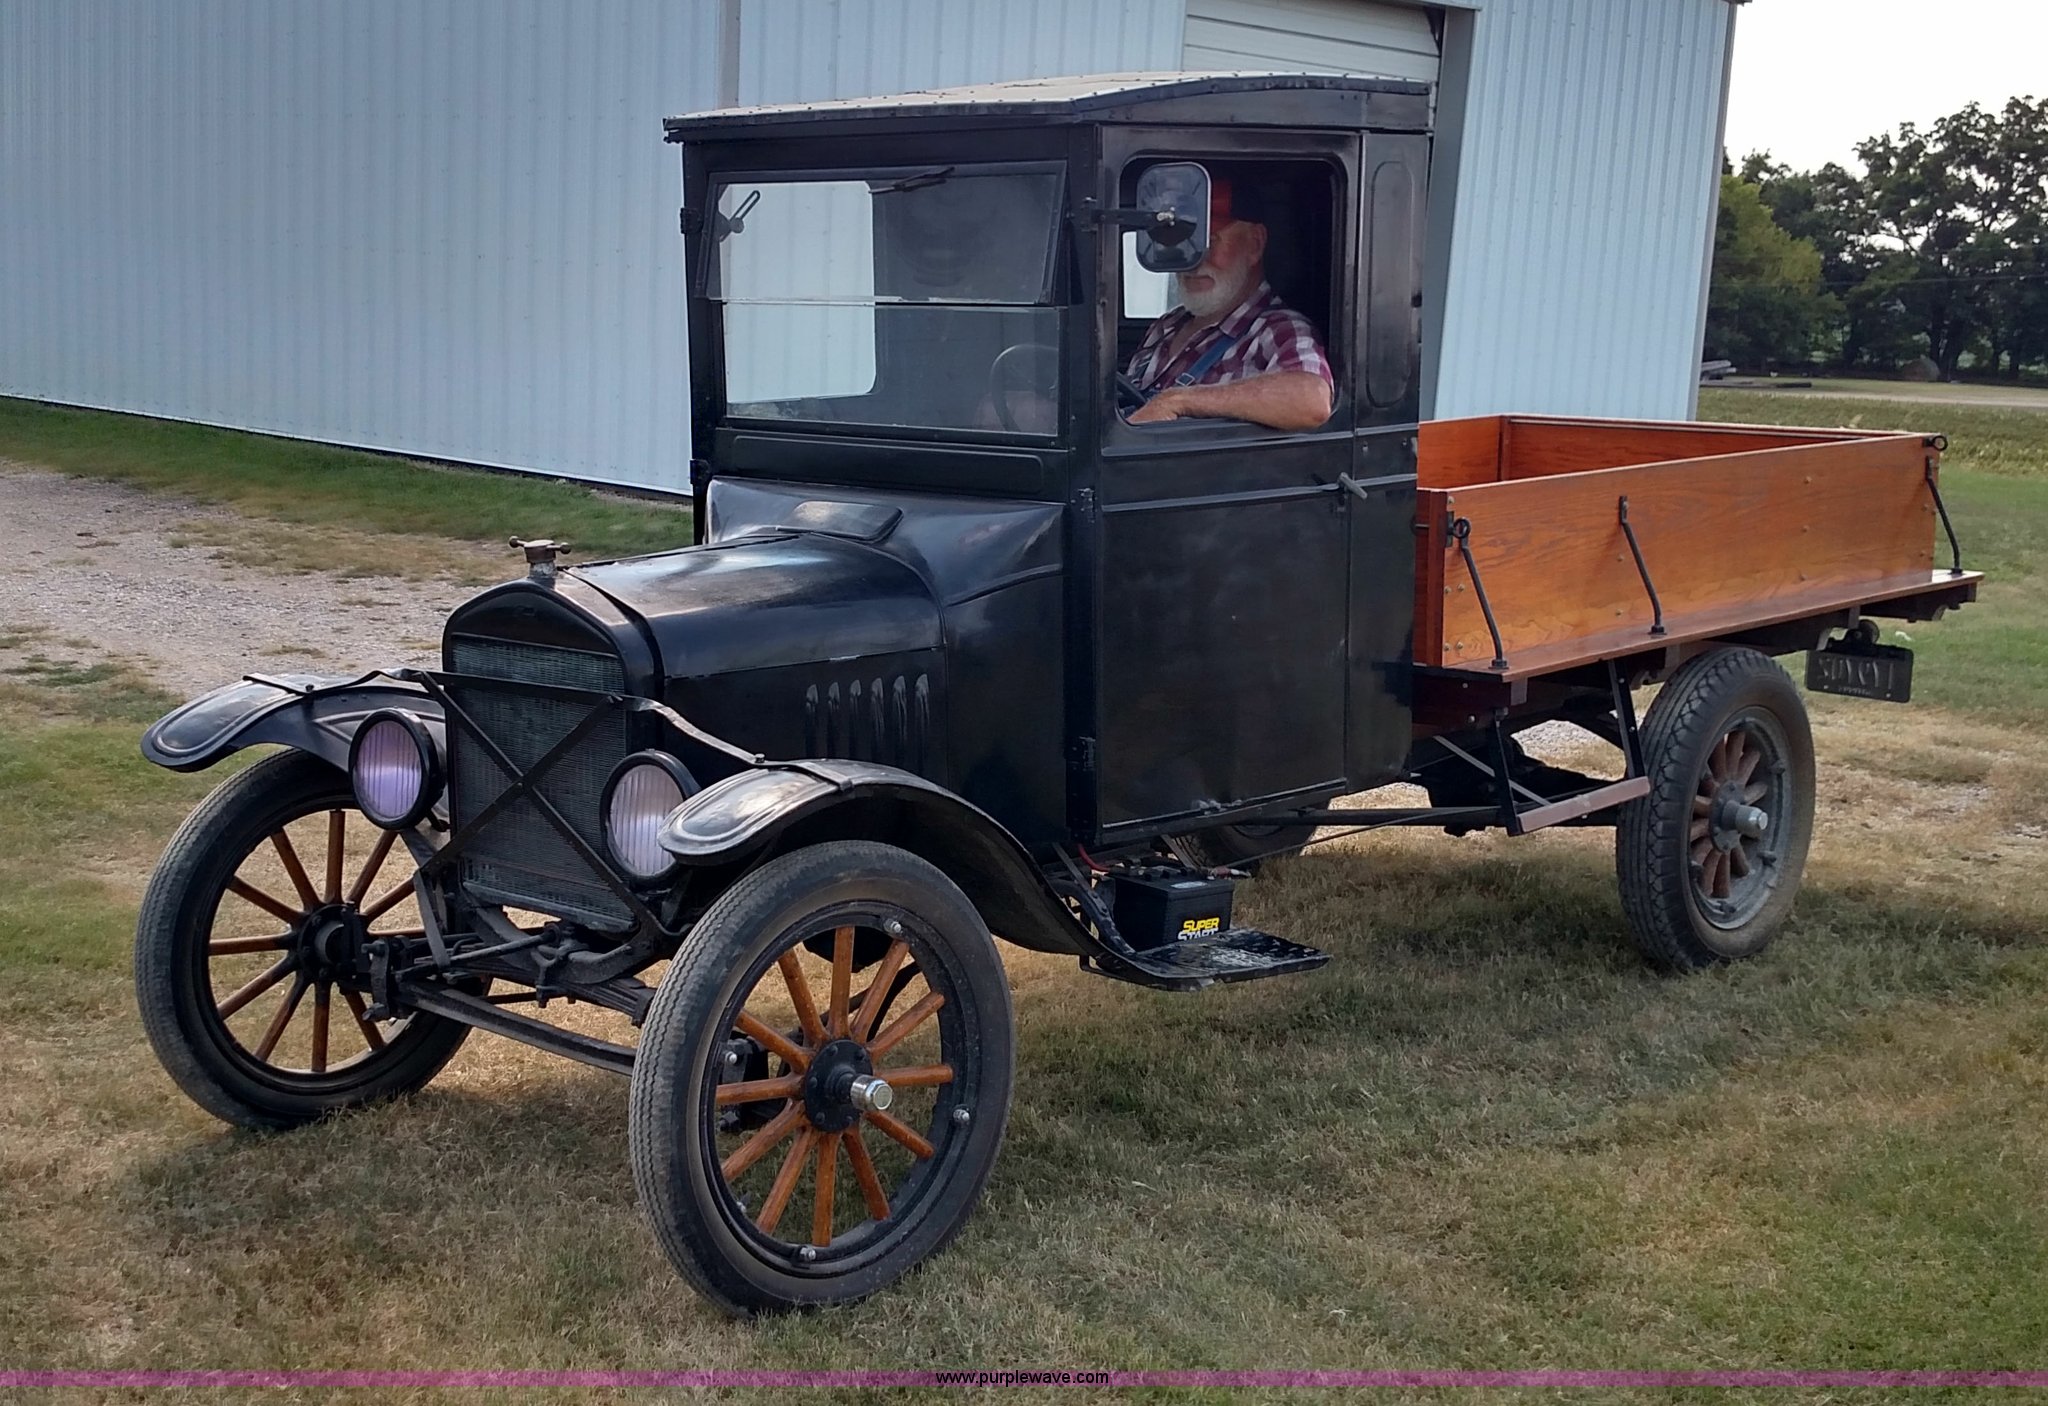 Ford Model T Truck specs, photos, videos and more on TopWorldAuto